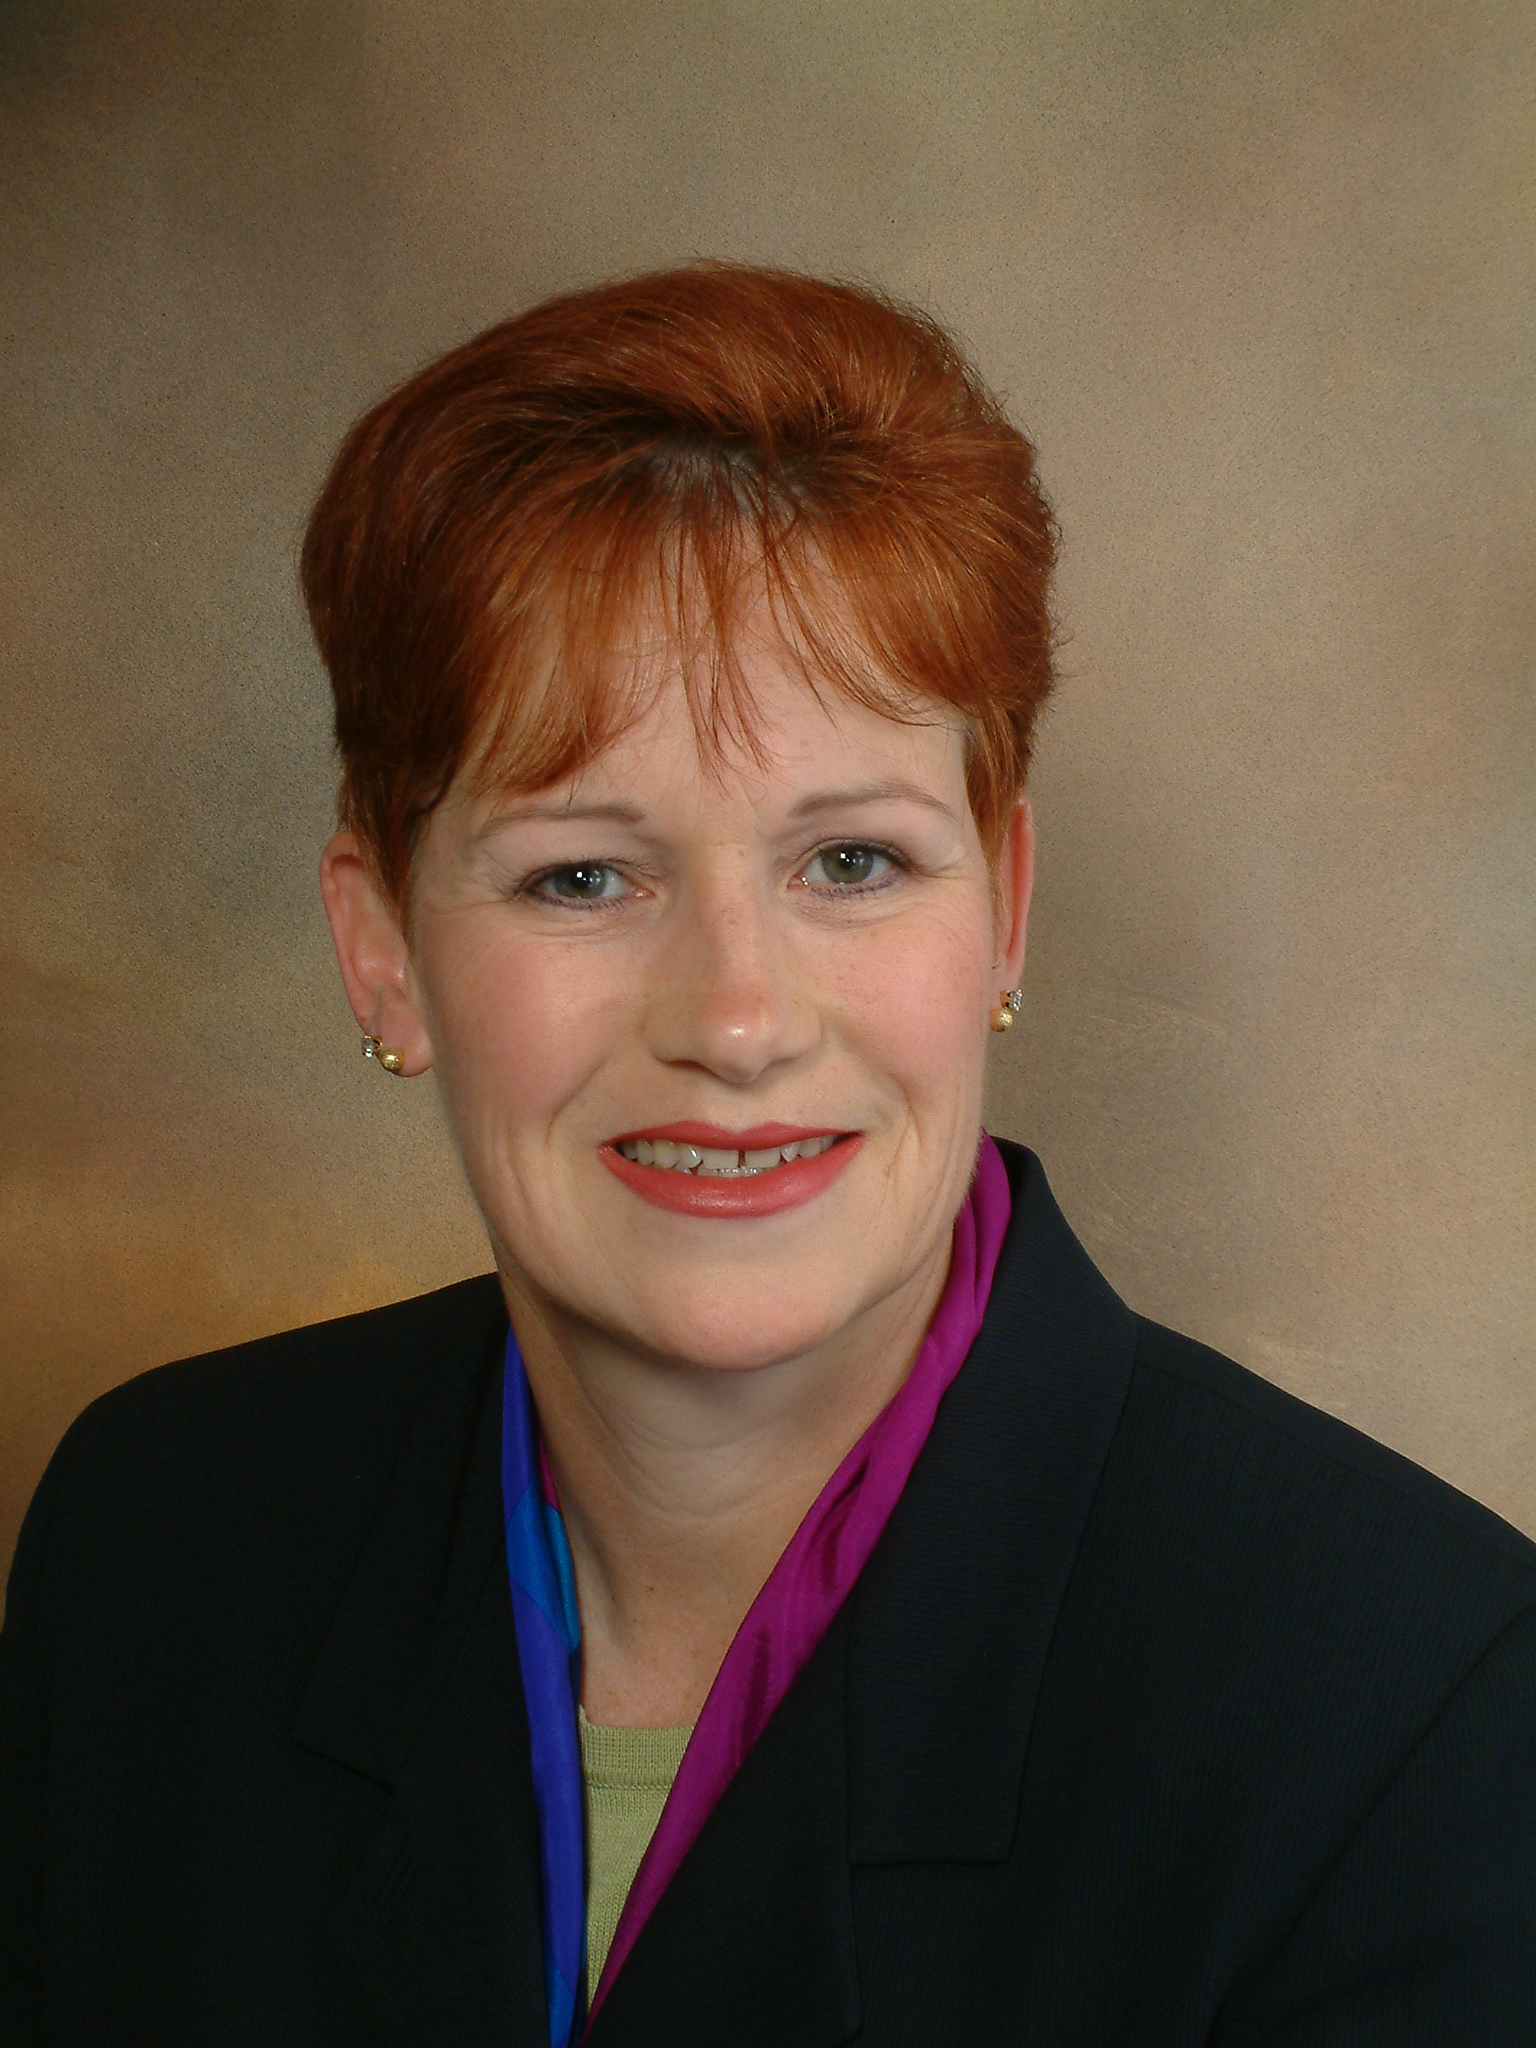 Katy Gnapp (pictured) received Honorable Mention for the 2016 Financier of the Year award.